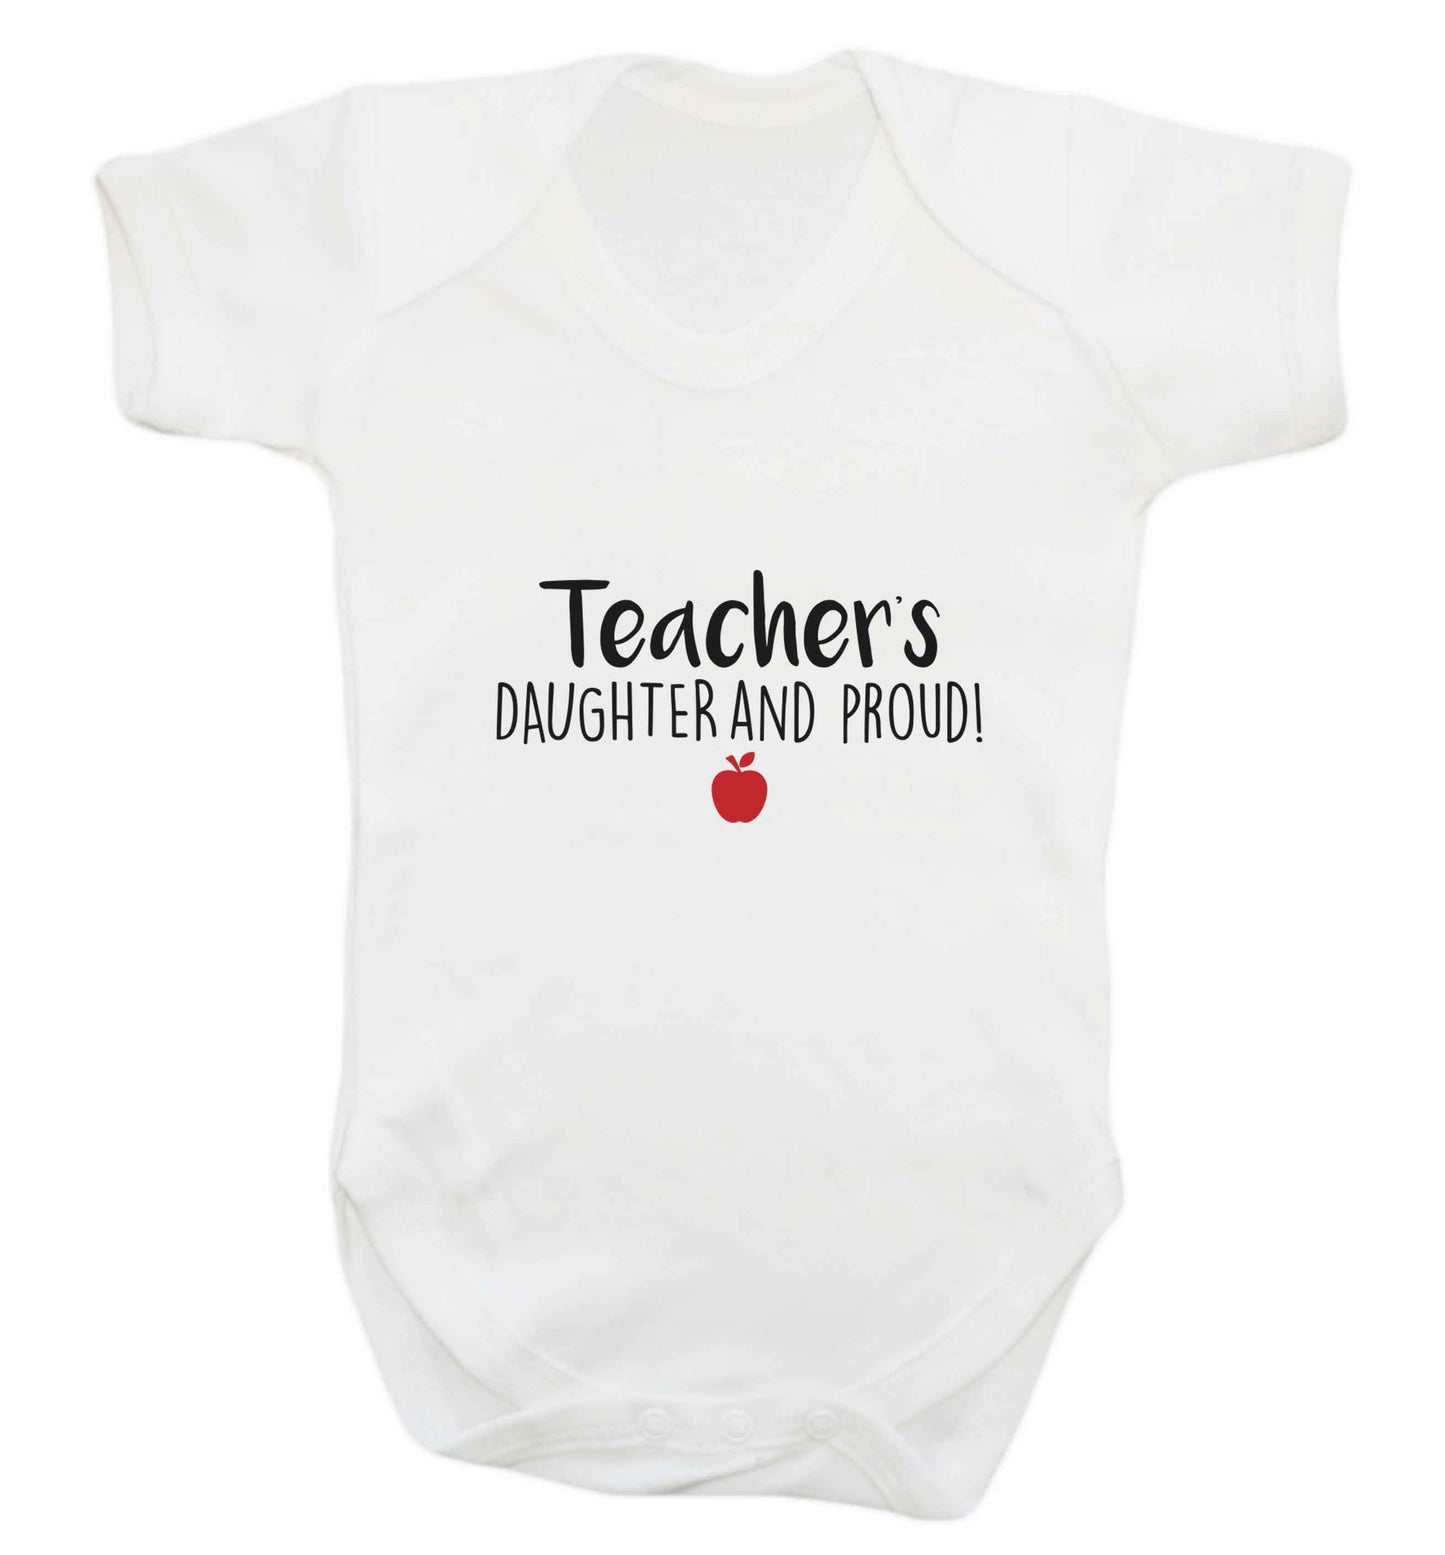 Teachers daughter and proud baby vest white 18-24 months